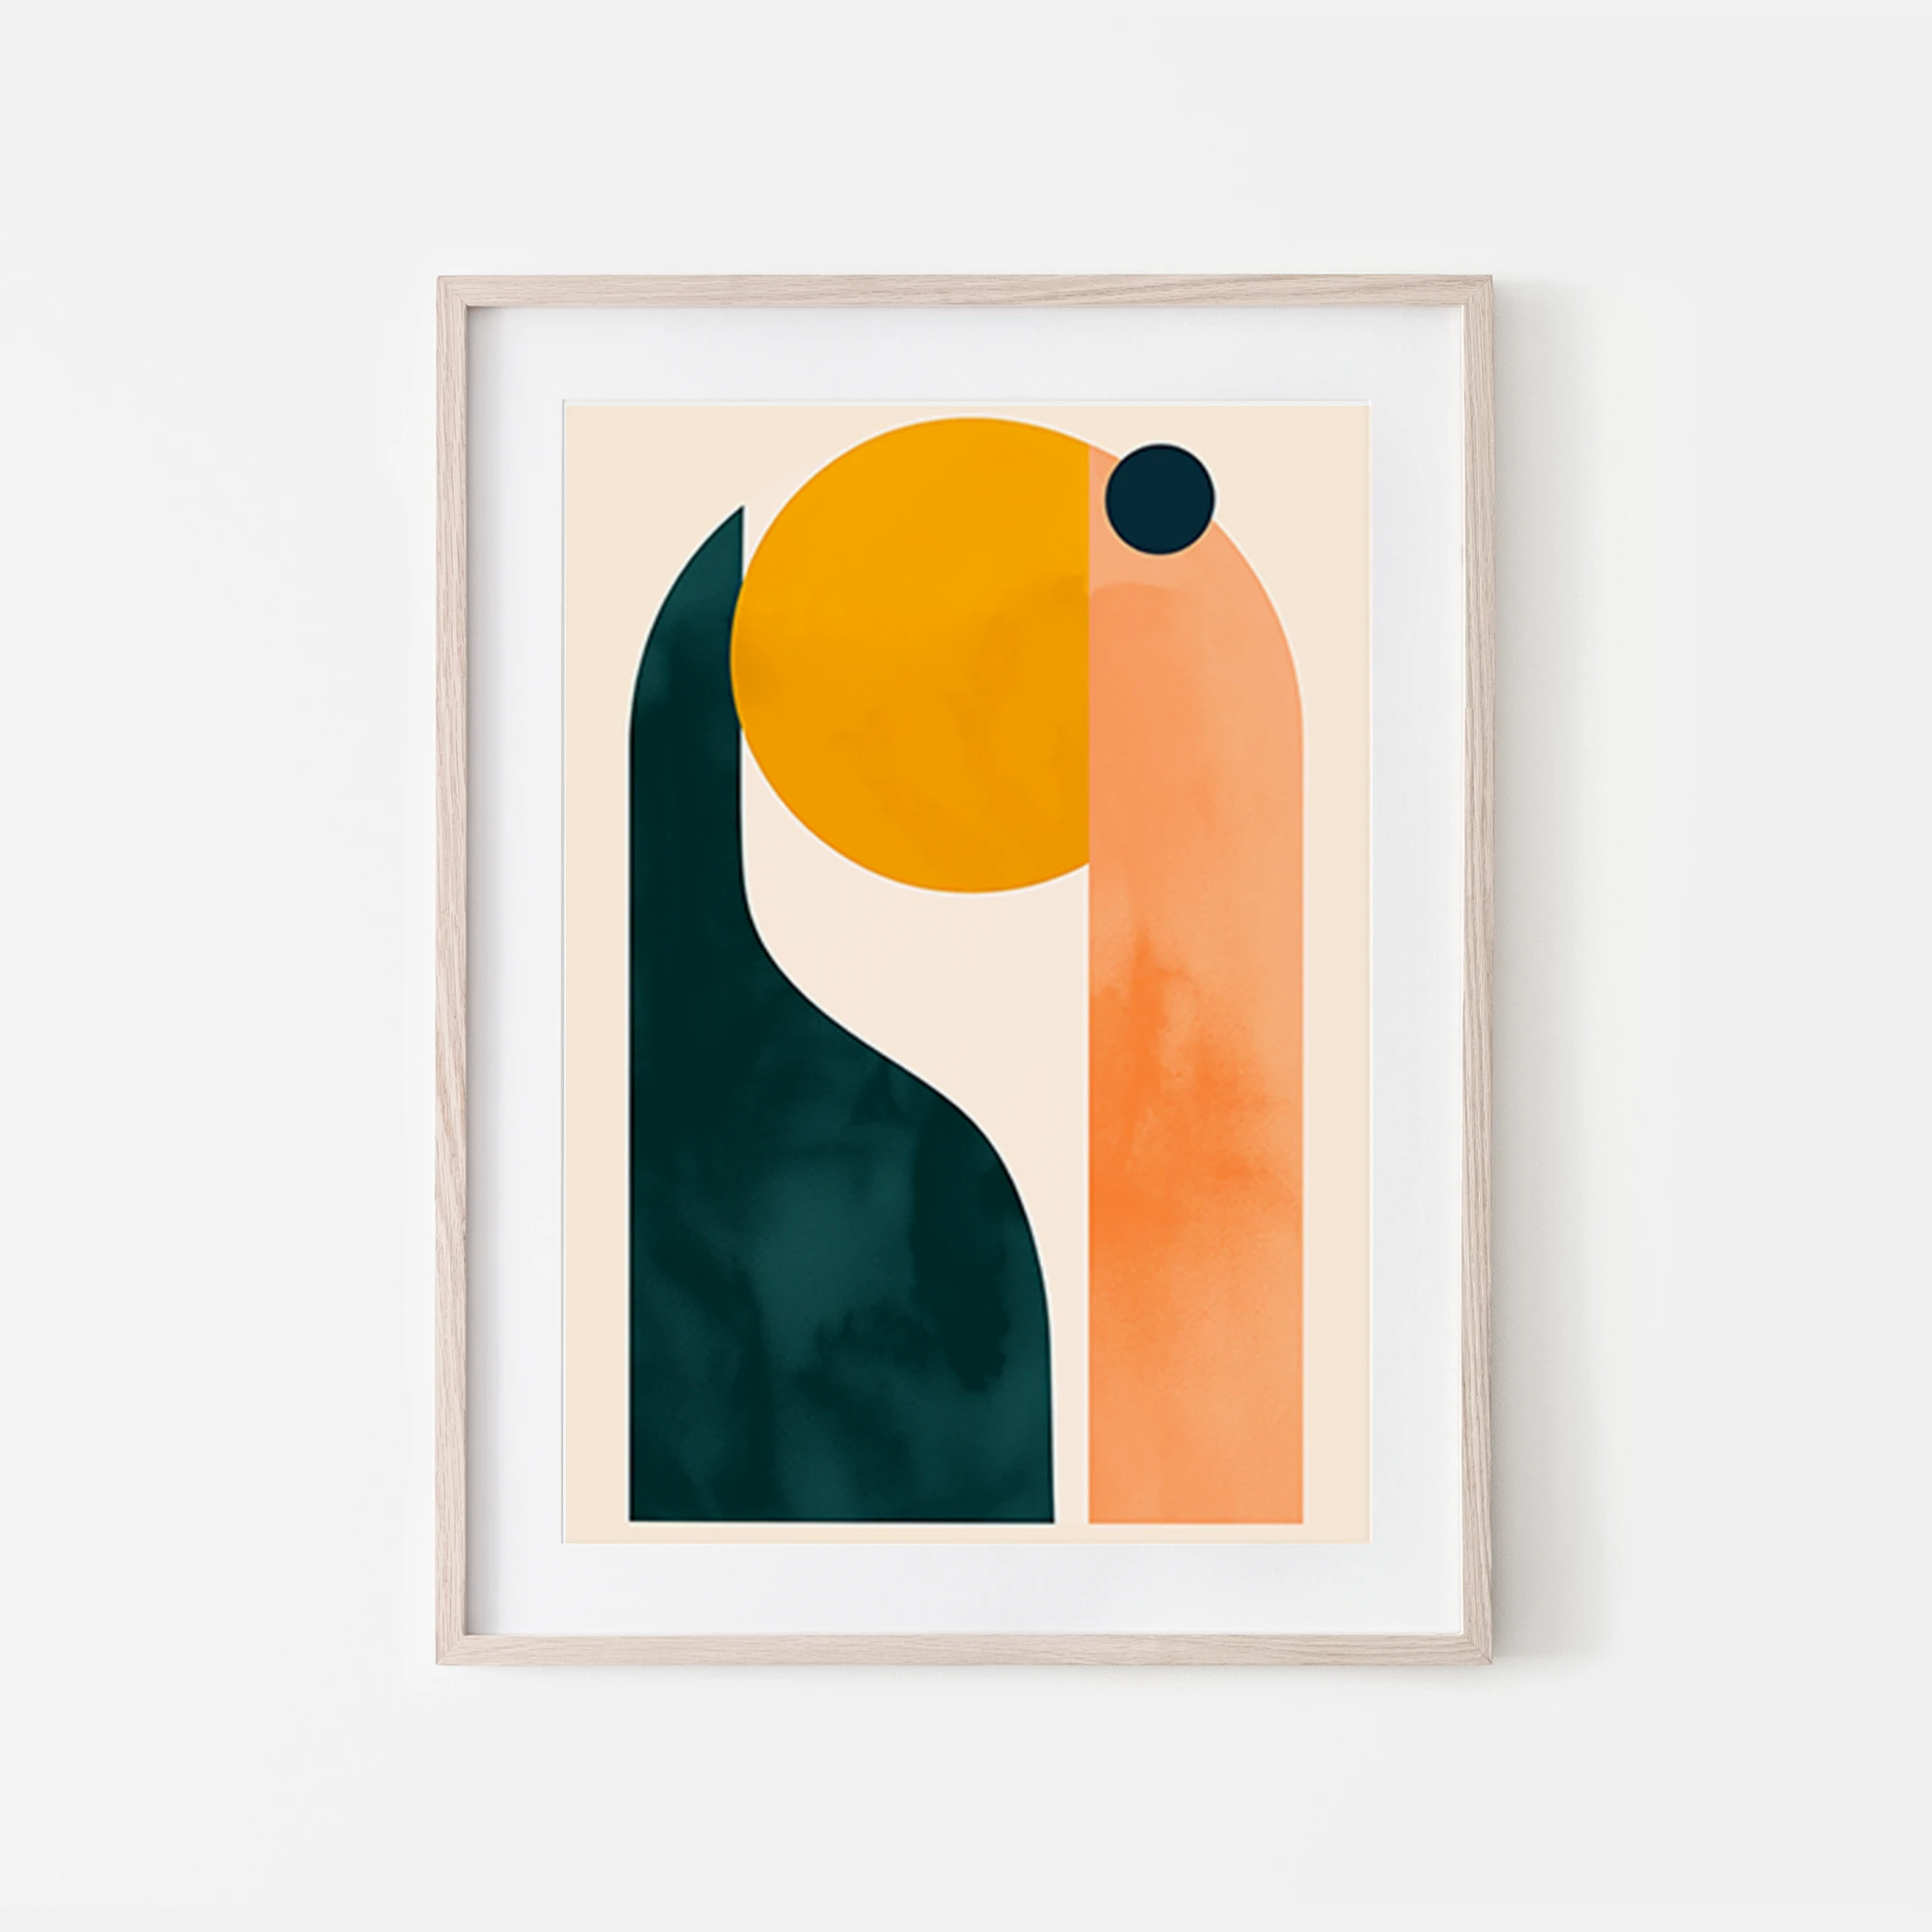 Abstract minimalist art print with yellow orange and evergreen colours free to download